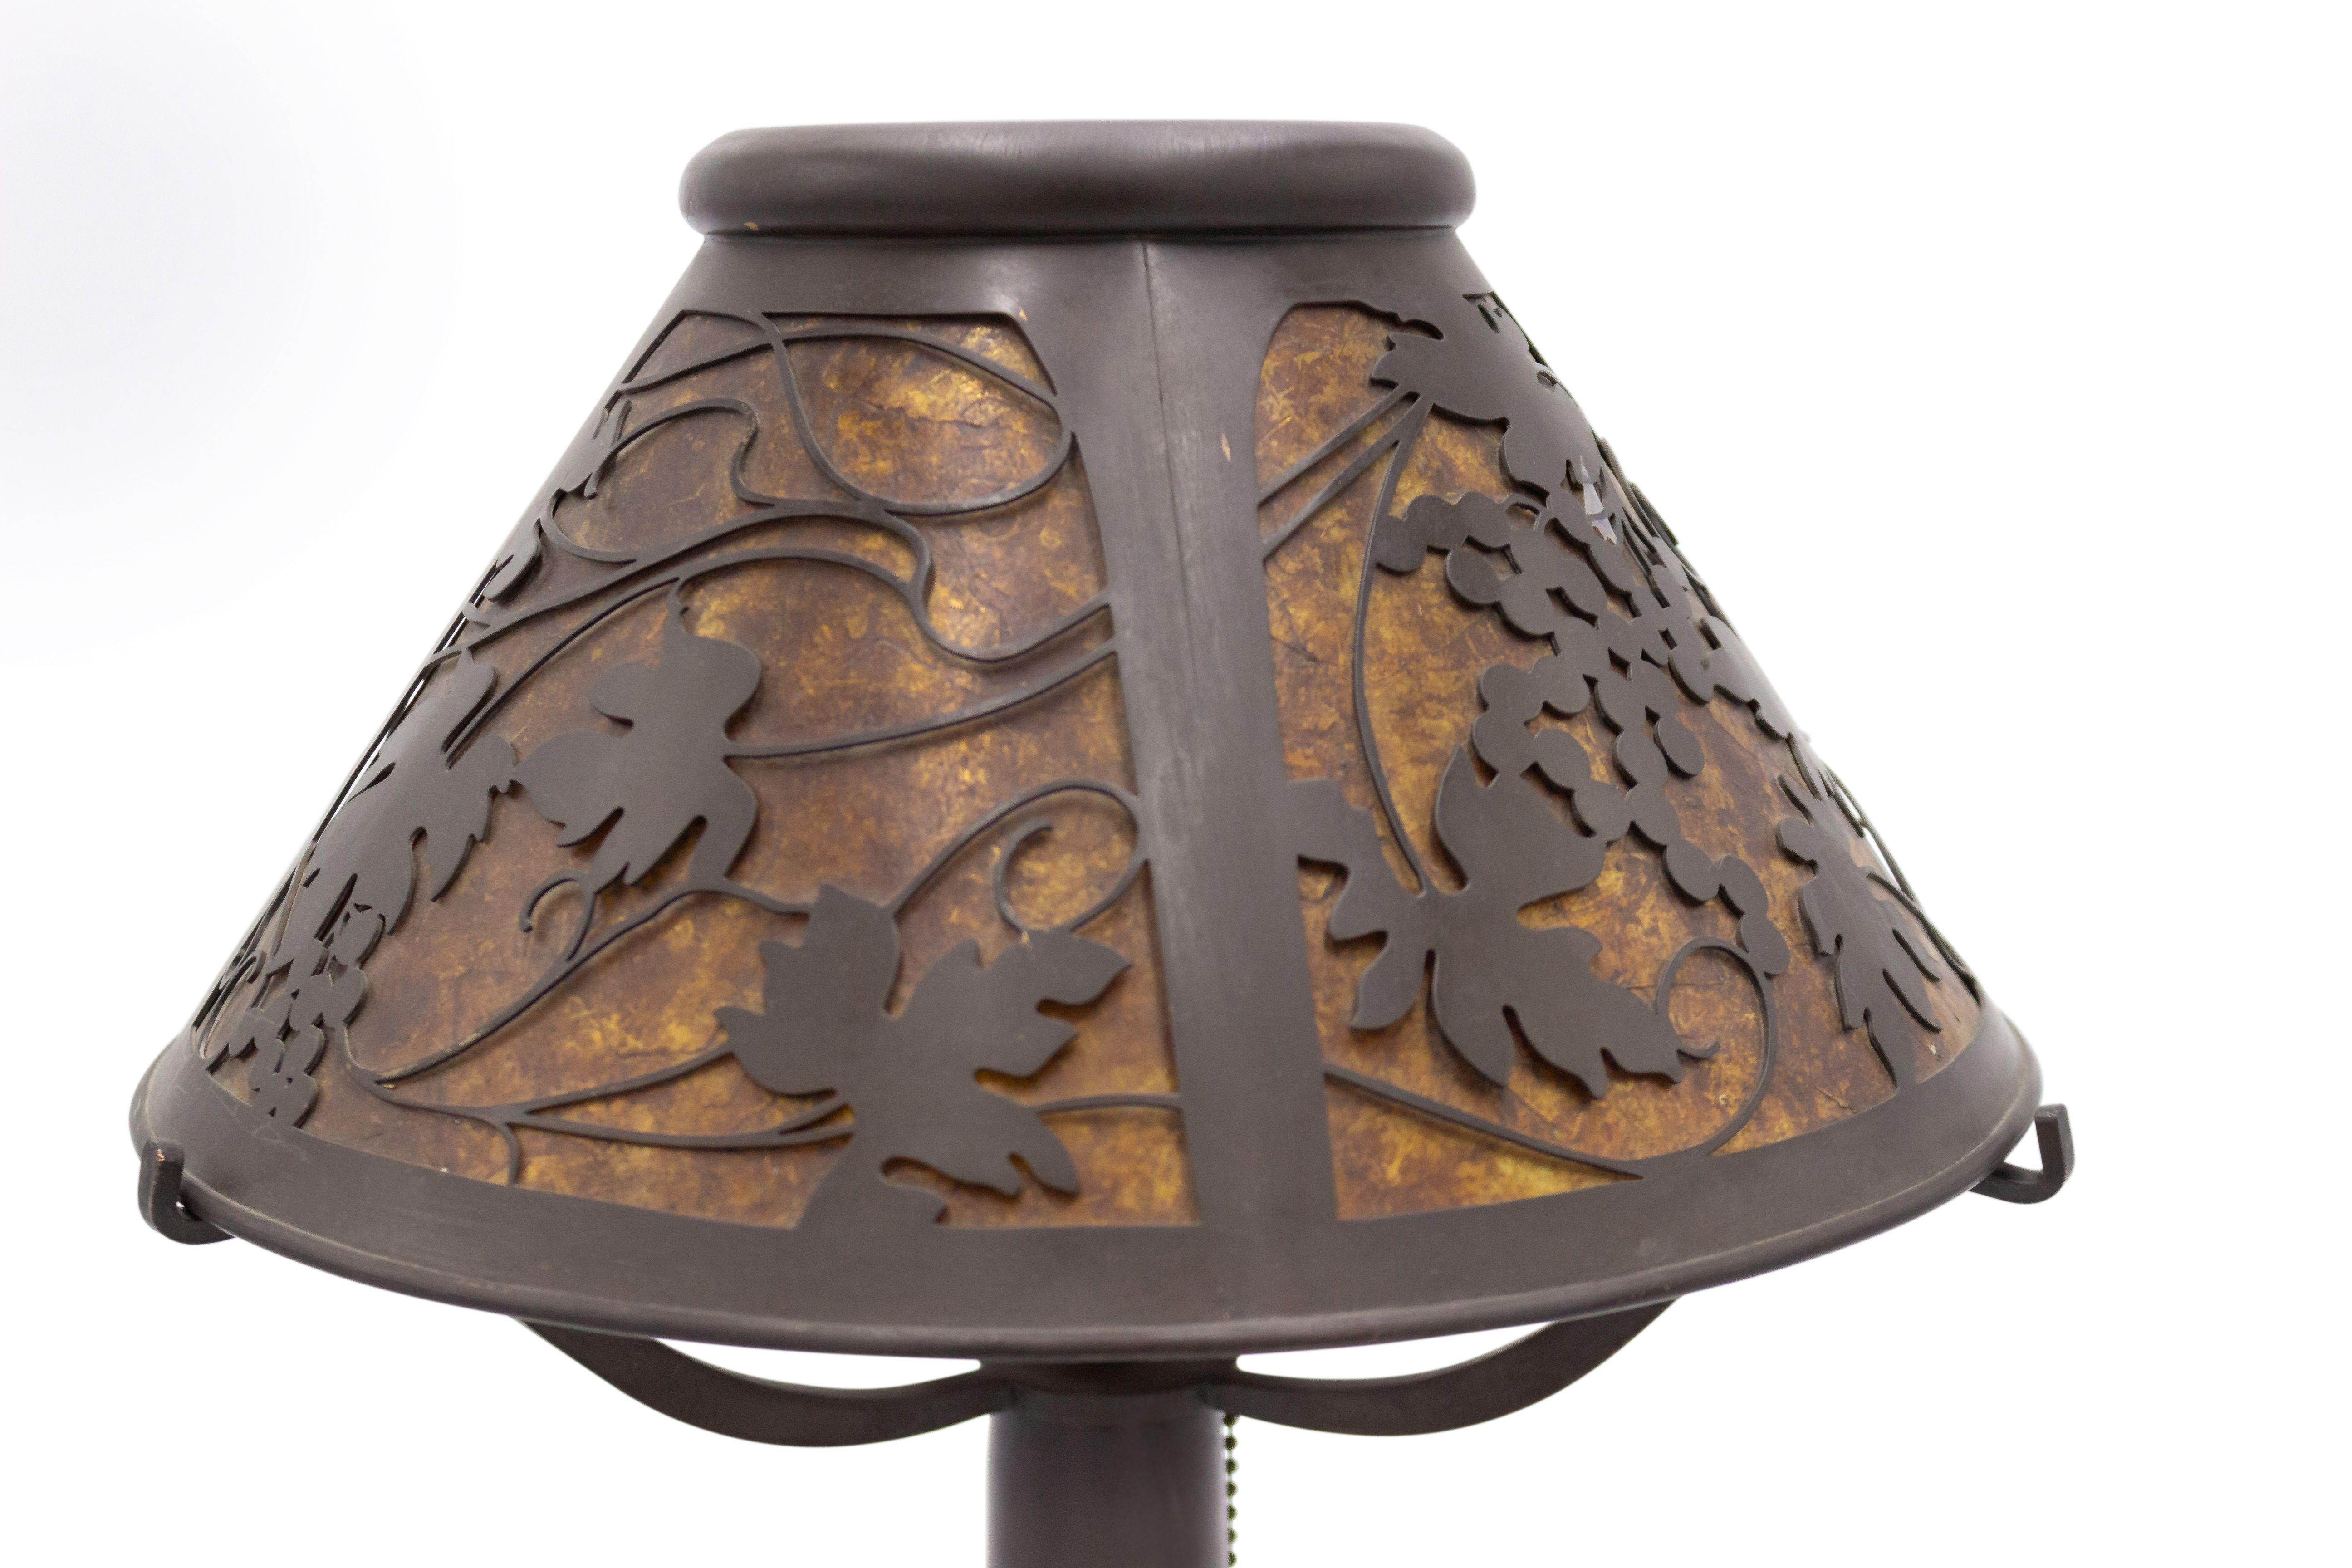 American Mission bronze brown patina table lamp with grape leaf silver deposit design on base and natural mica shade with filigree grape vine overlay (HEINTZ ART METAL).
